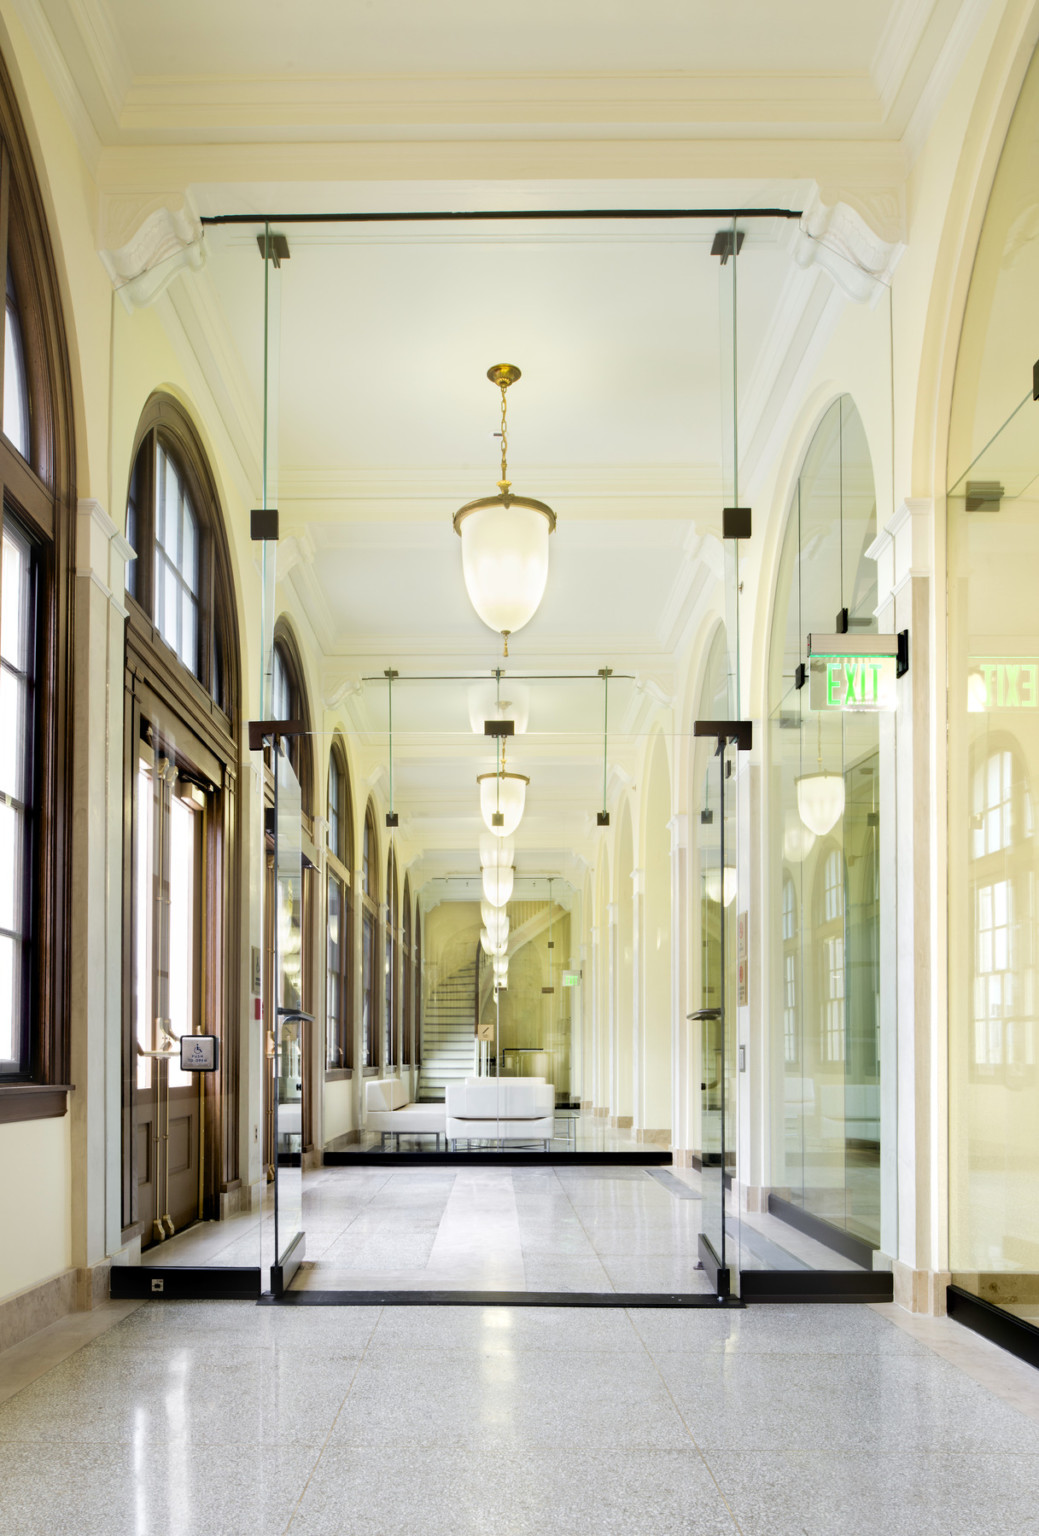 A hallway lined with arched windows and mirrors and central pendant lights leading to a curved stairwell